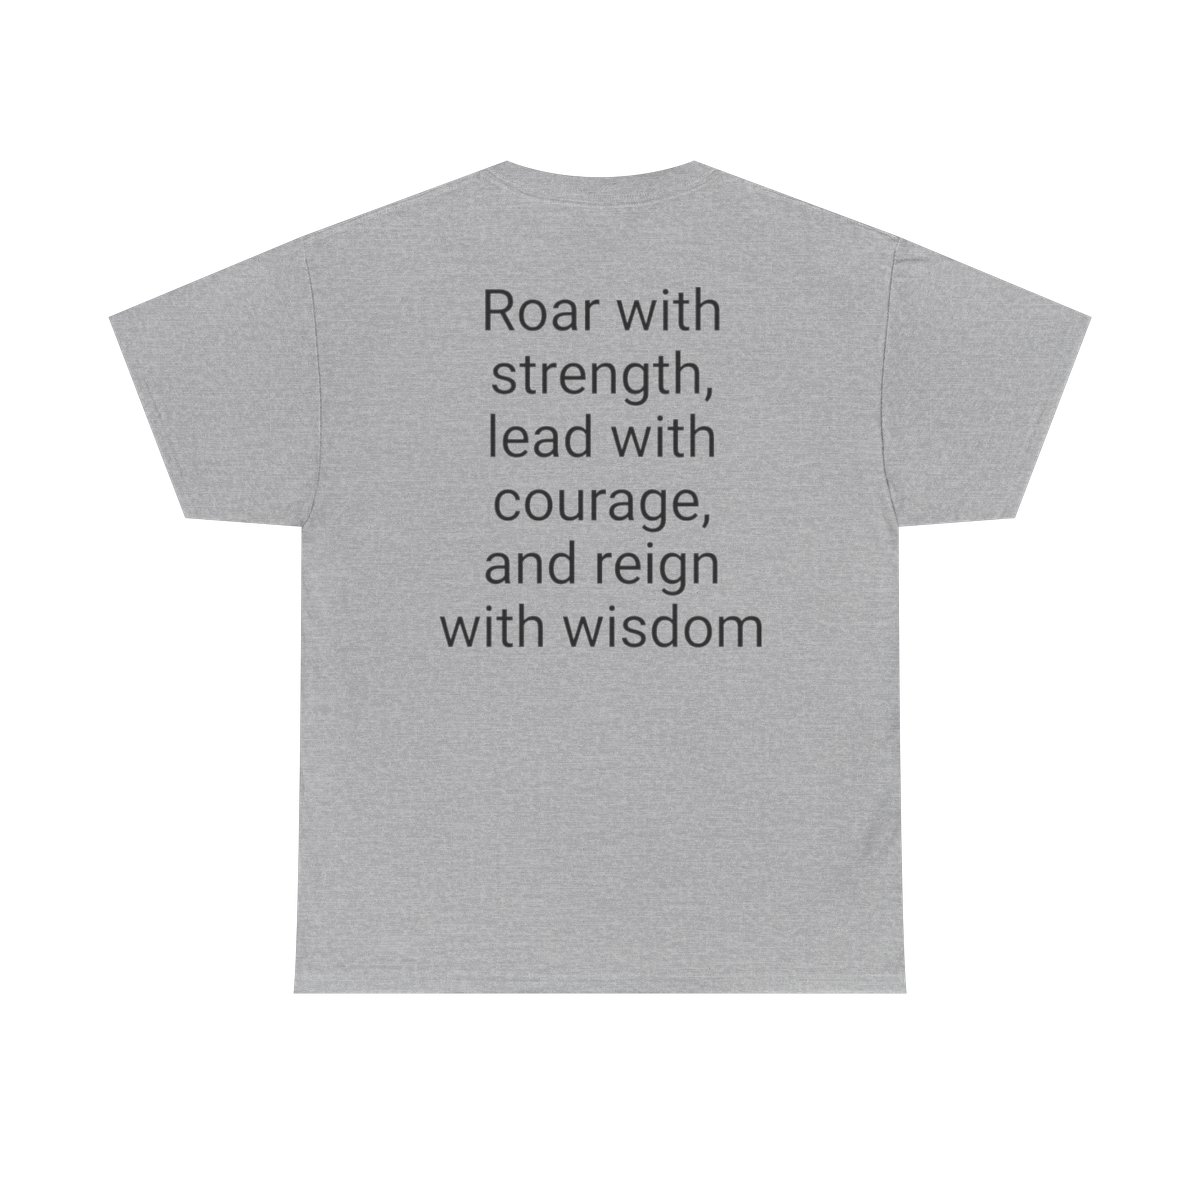 Lion  - Unisex Heavy Cotton Tee   "Roar with strength, lead with courage, and reign with wisdom." product main image